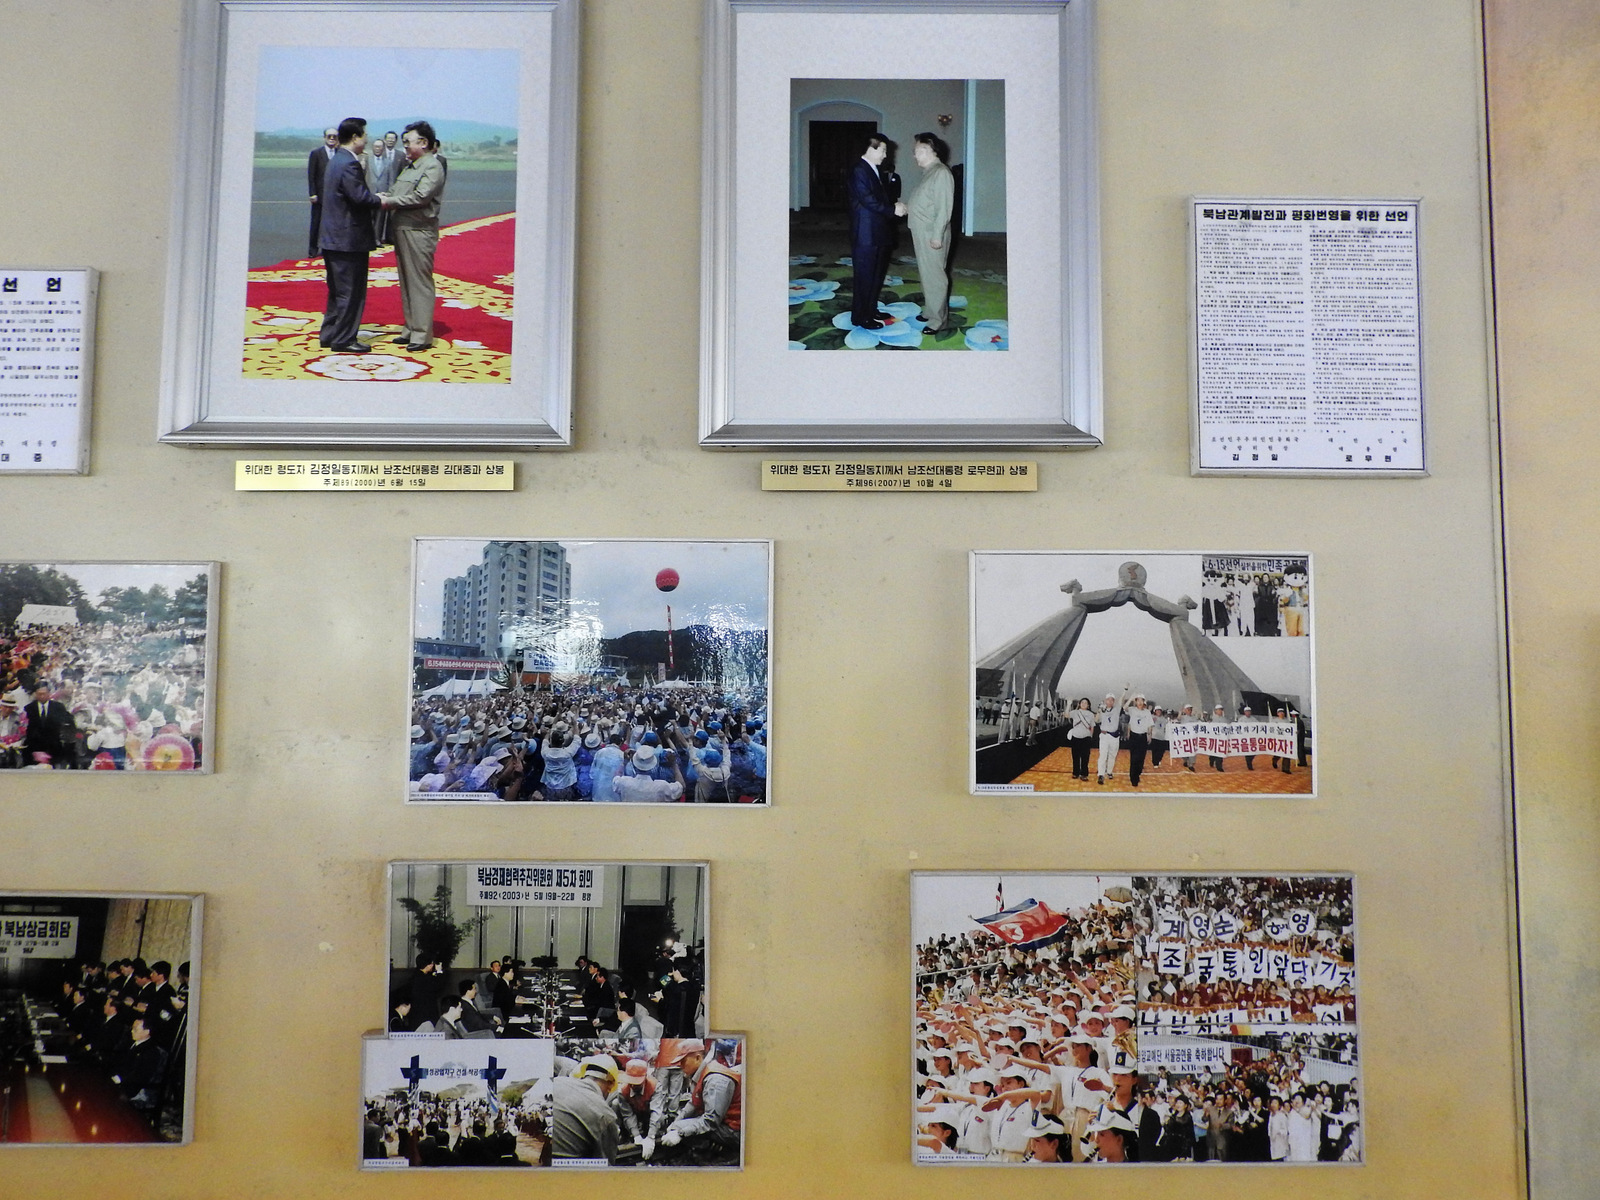  In a hall near the DMZ, photos depict 2000 and 2007 meetings between North and South discussing reunification, as well as the support of the people in both South and North. Our guide at Panmunjom noted: “On July 7, 1994, the day before he died, President Kim Il-Sung was looking through documents regarding reunification. He devoted his whole life to this.”